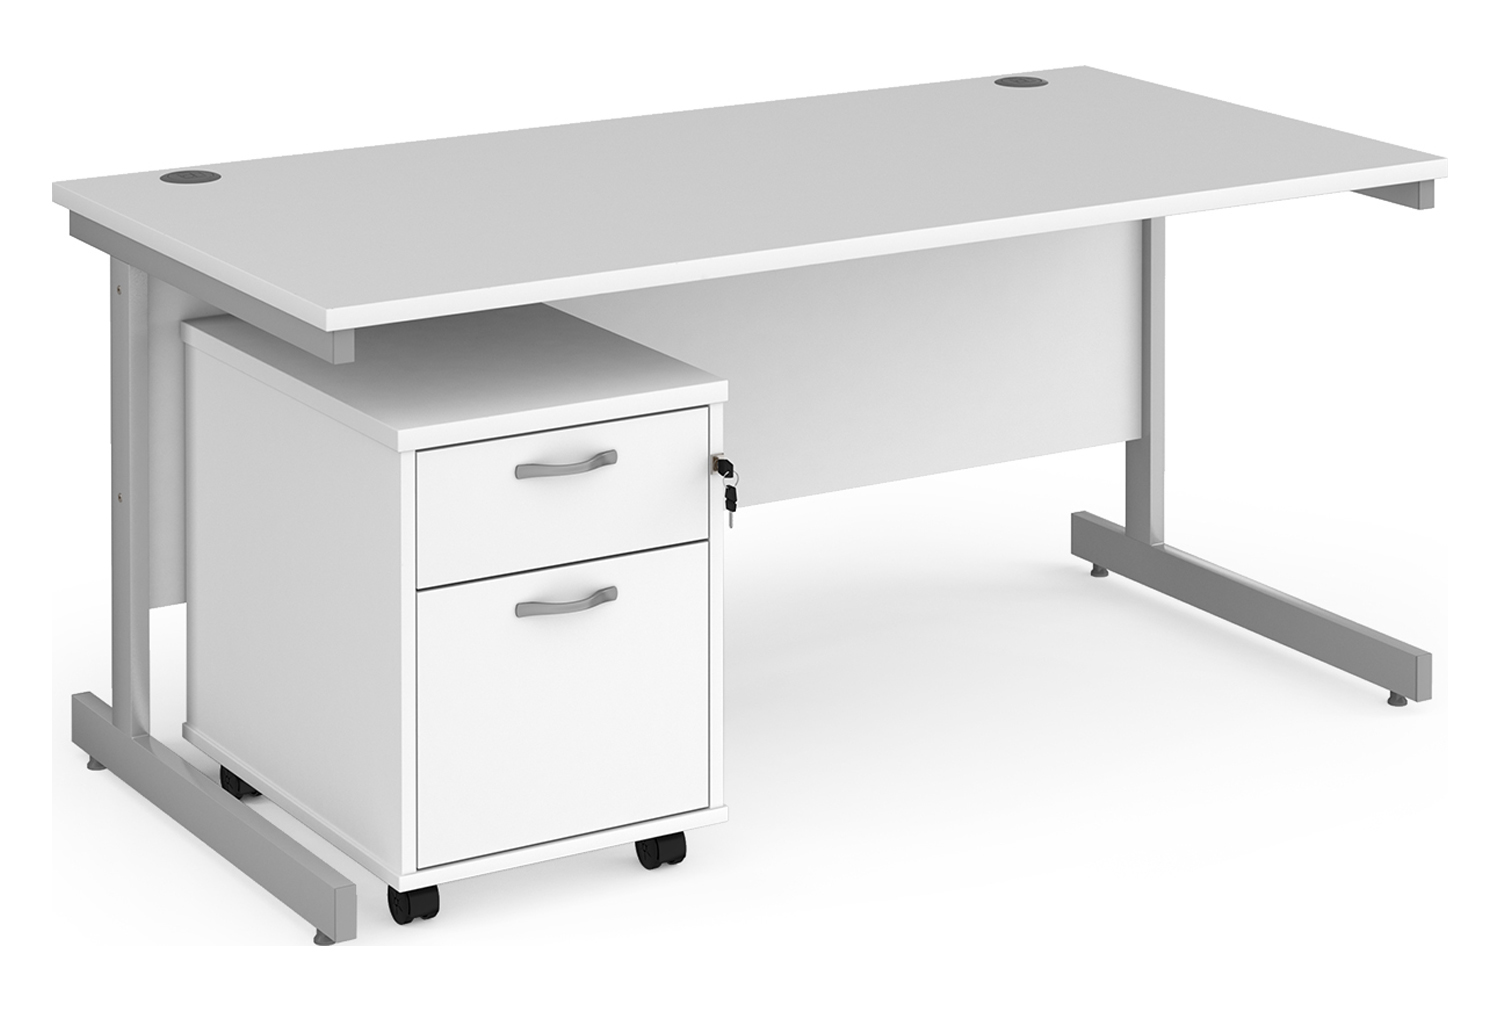 Thrifty Next-Day Office Desk Bundle Deal 1 White, 160wx80dx73h (cm), Express Delivery